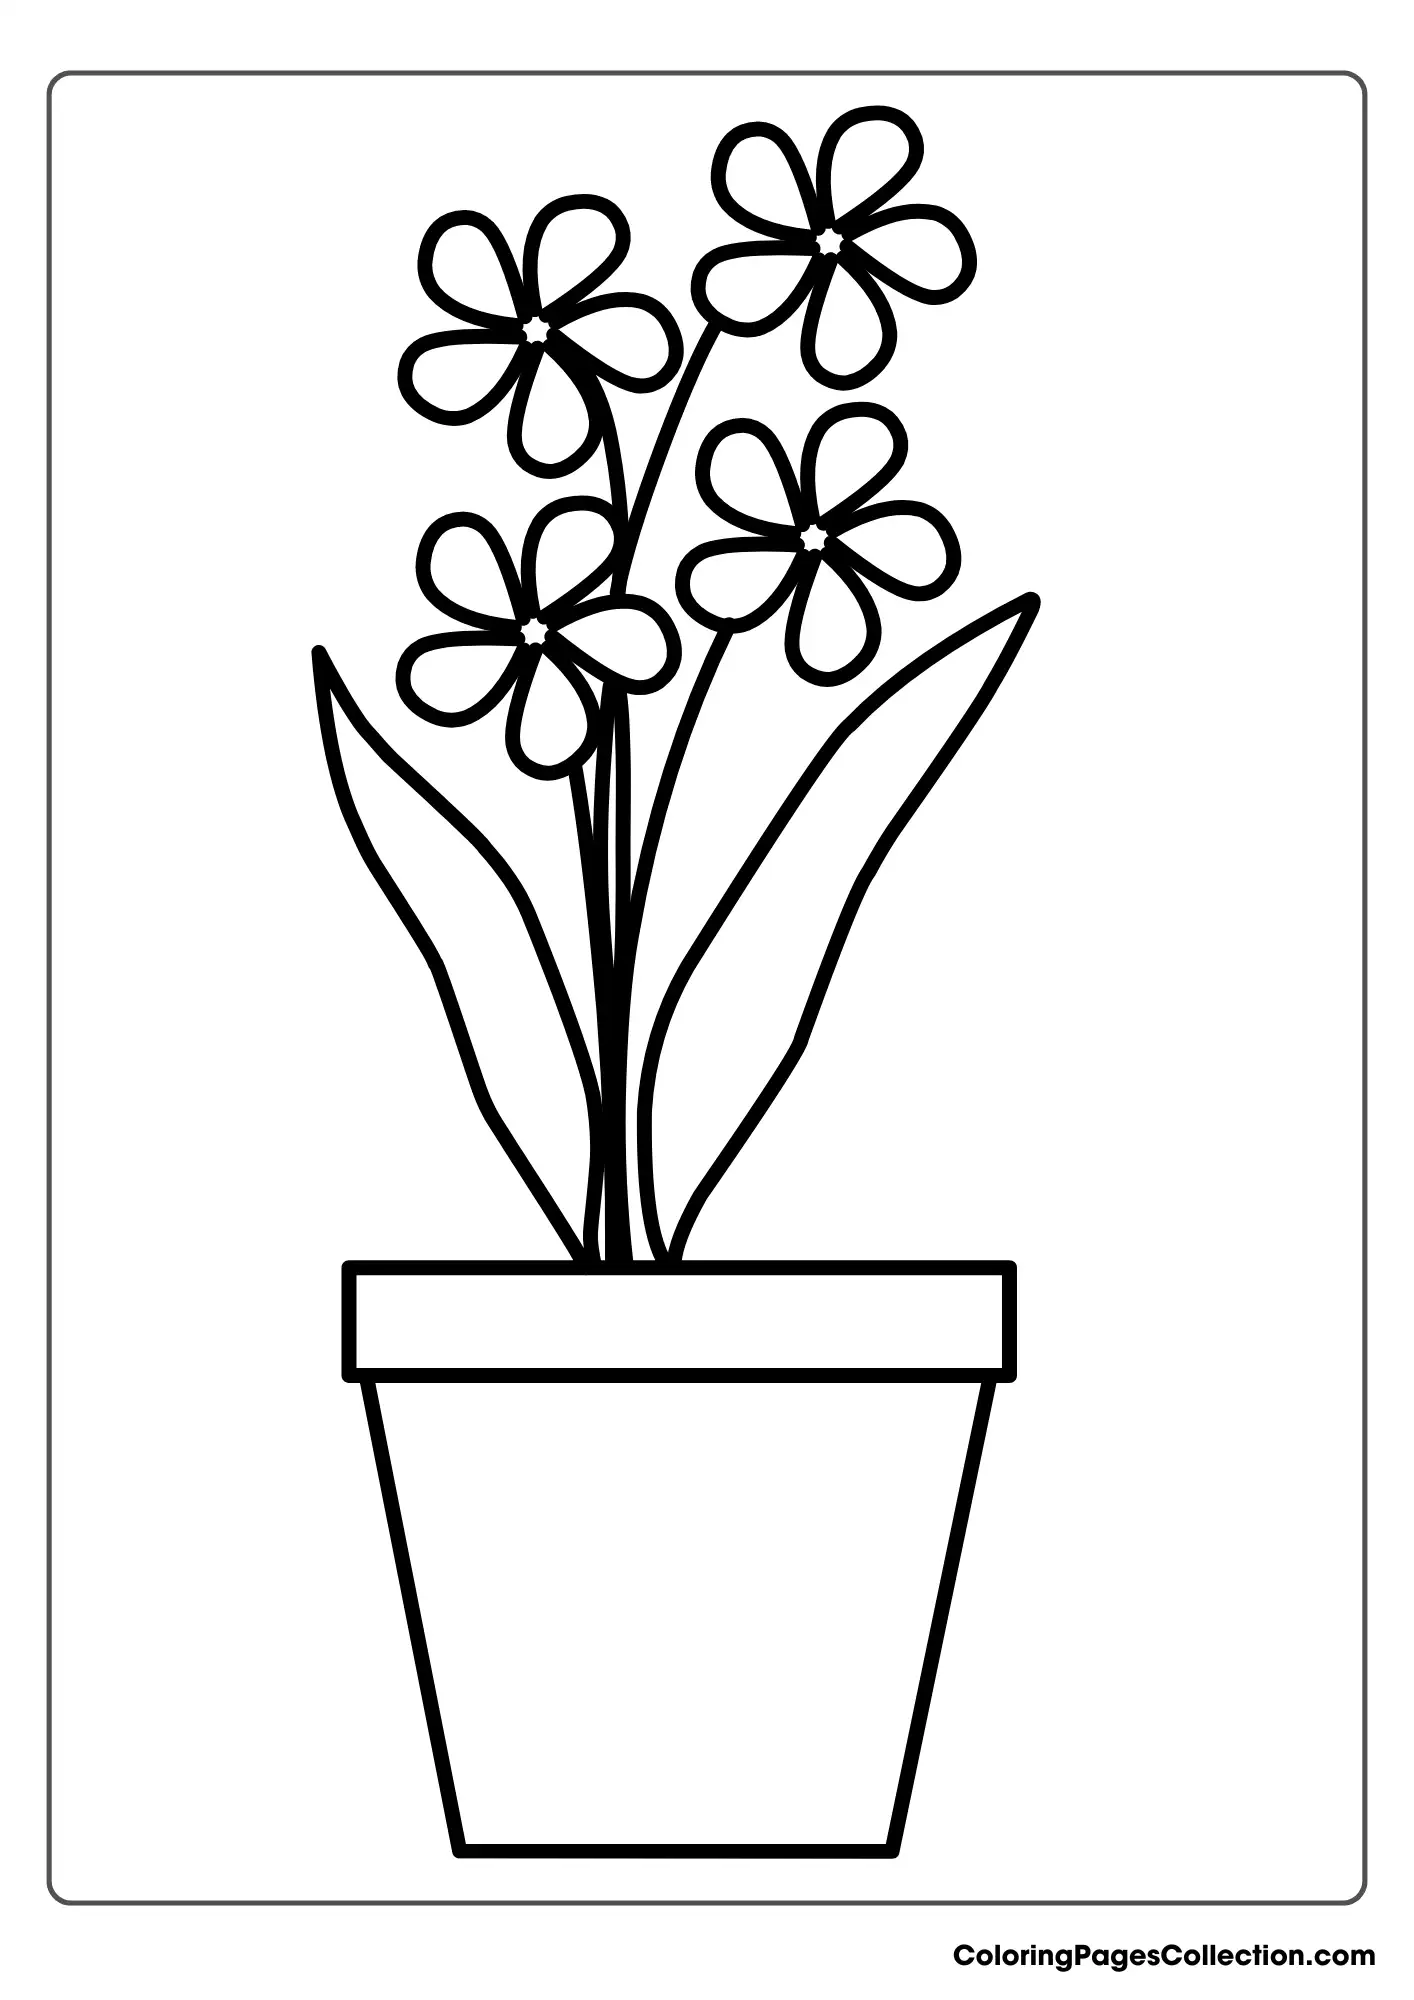 A Flower Pot With Flowers In It Coloring Page